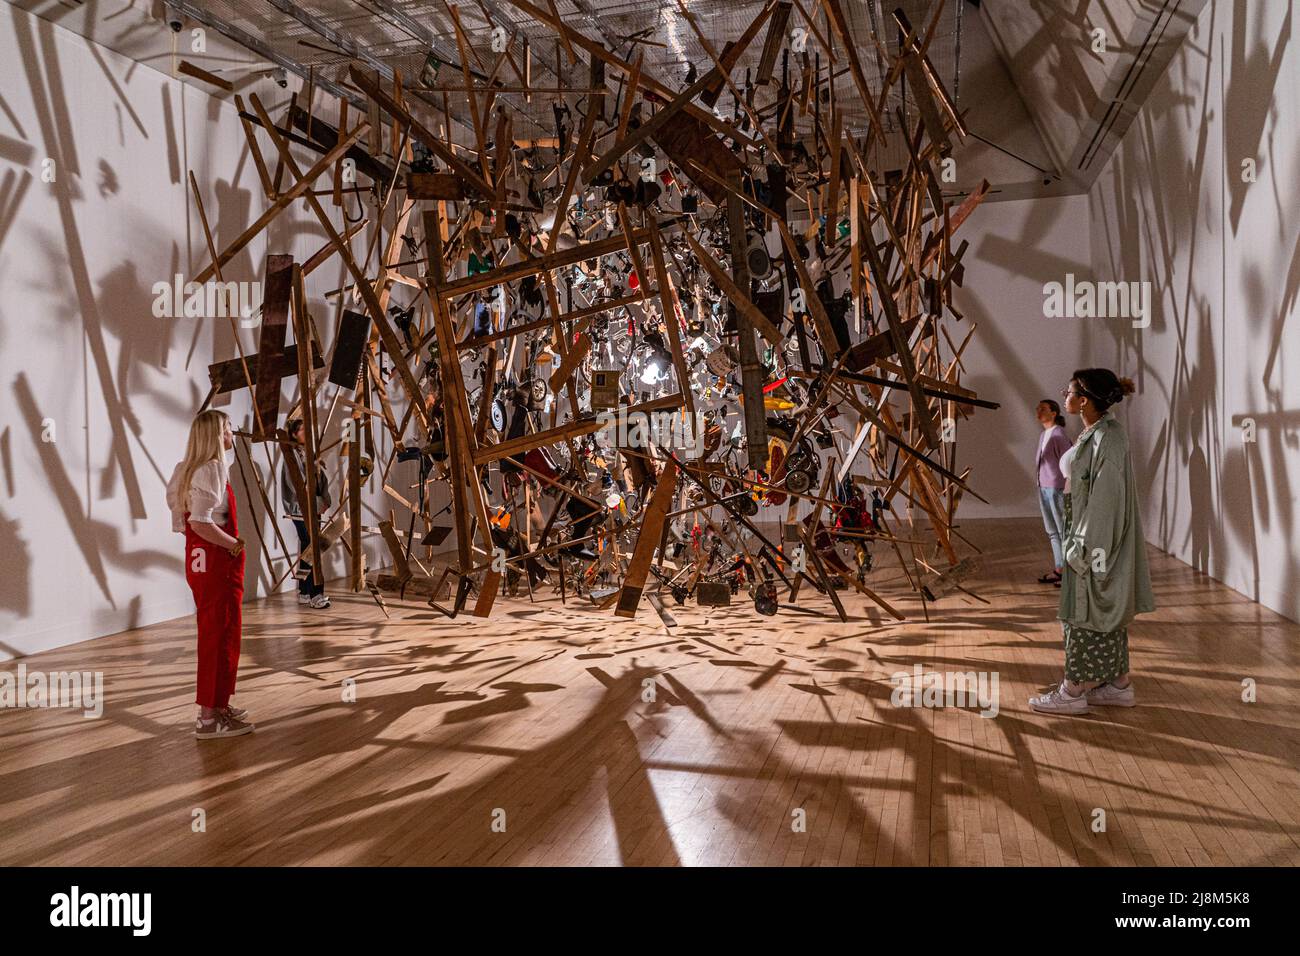 London UK, 17 May 2022. Cornelia Parker, Cold Dark Matter: An Exploded View  1991. TAn exhibition at Tate Britain which brings together the iconic  suspended works by British contemporary artists Cornelia Parker